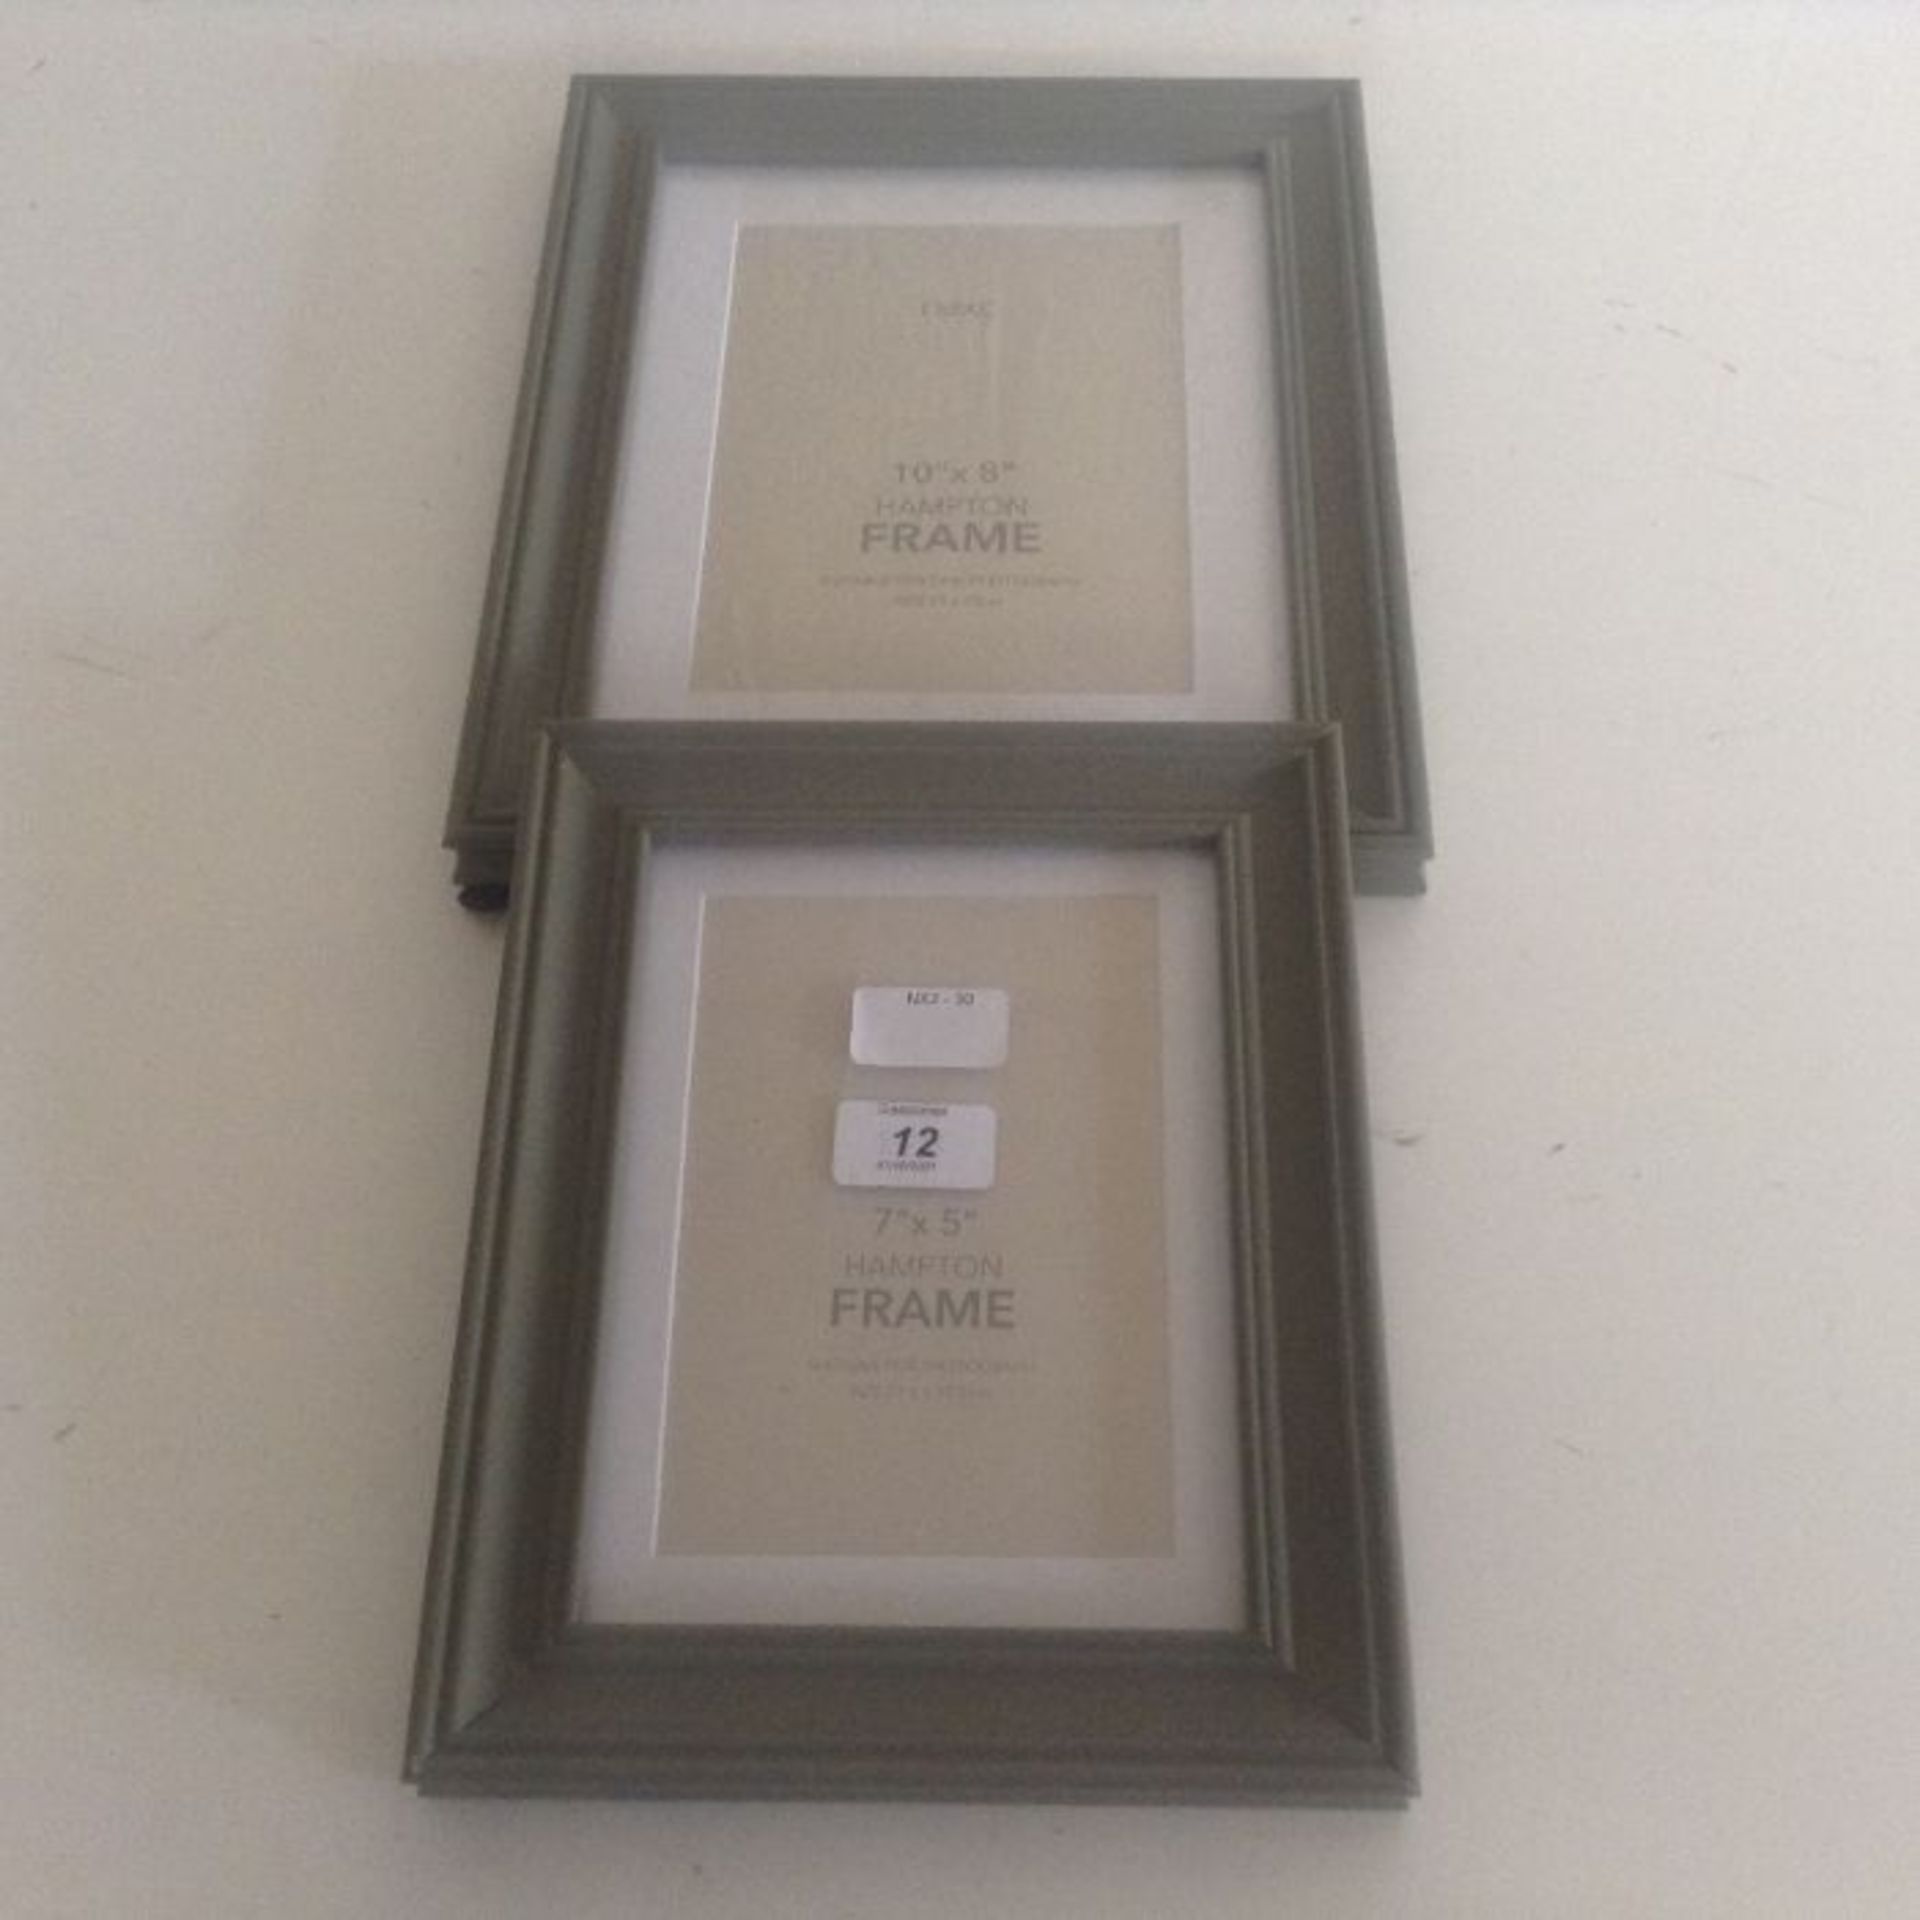 PAIR OF GREEN WOODEN FRAMES ( 10" X 8" / 7" X 5" ) (NX2 - 30) - 7D - Image 2 of 3